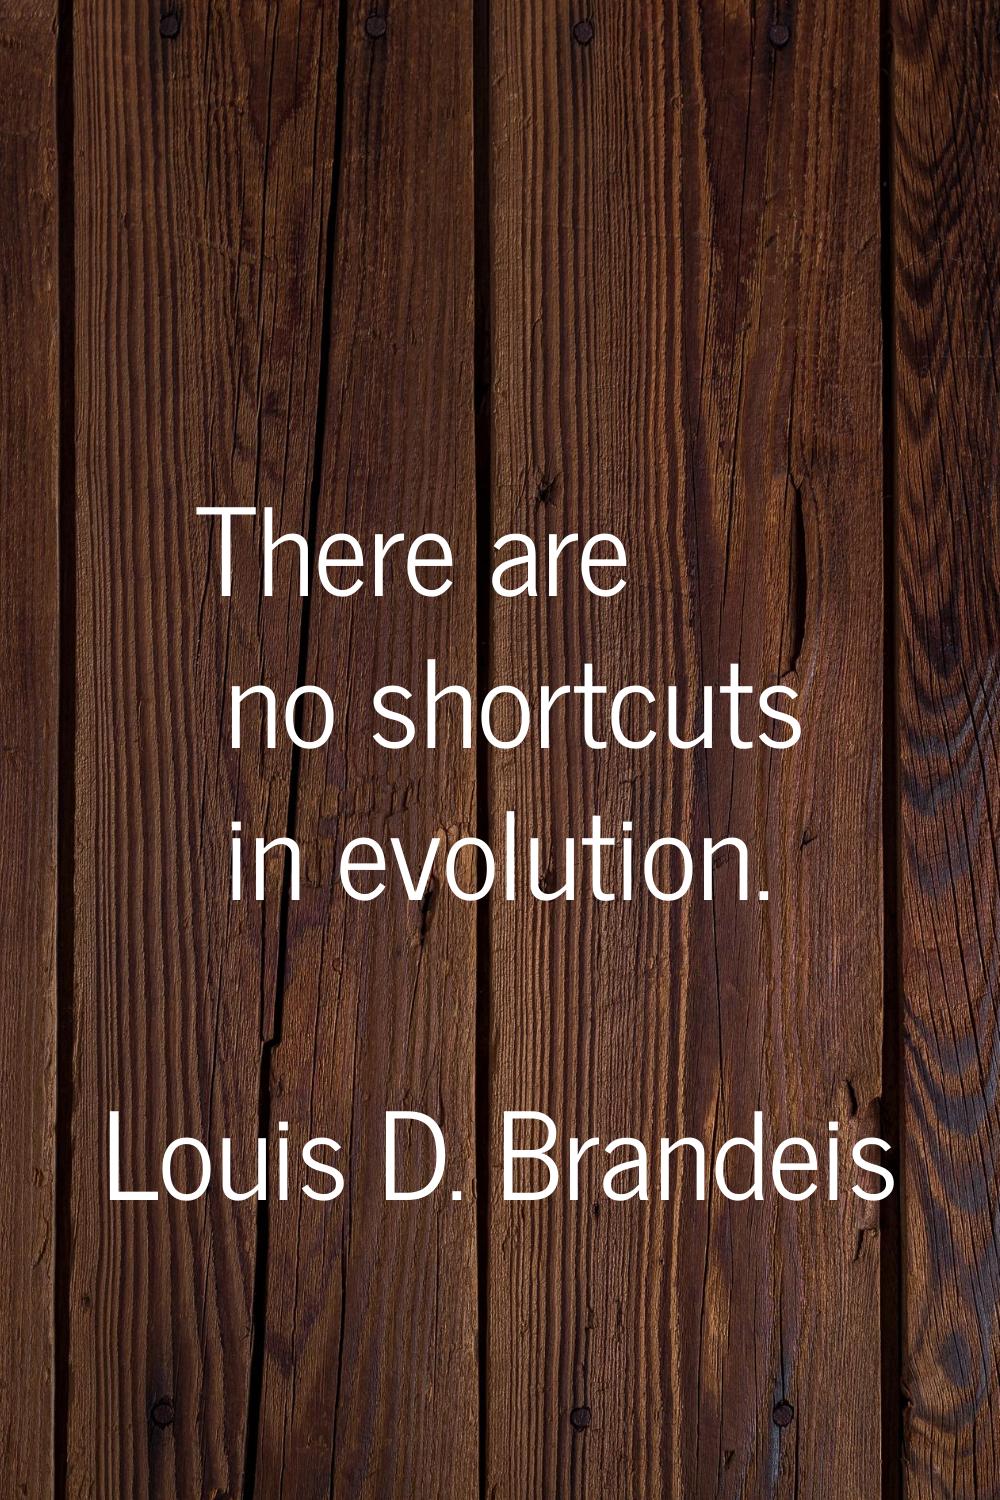 There are no shortcuts in evolution.